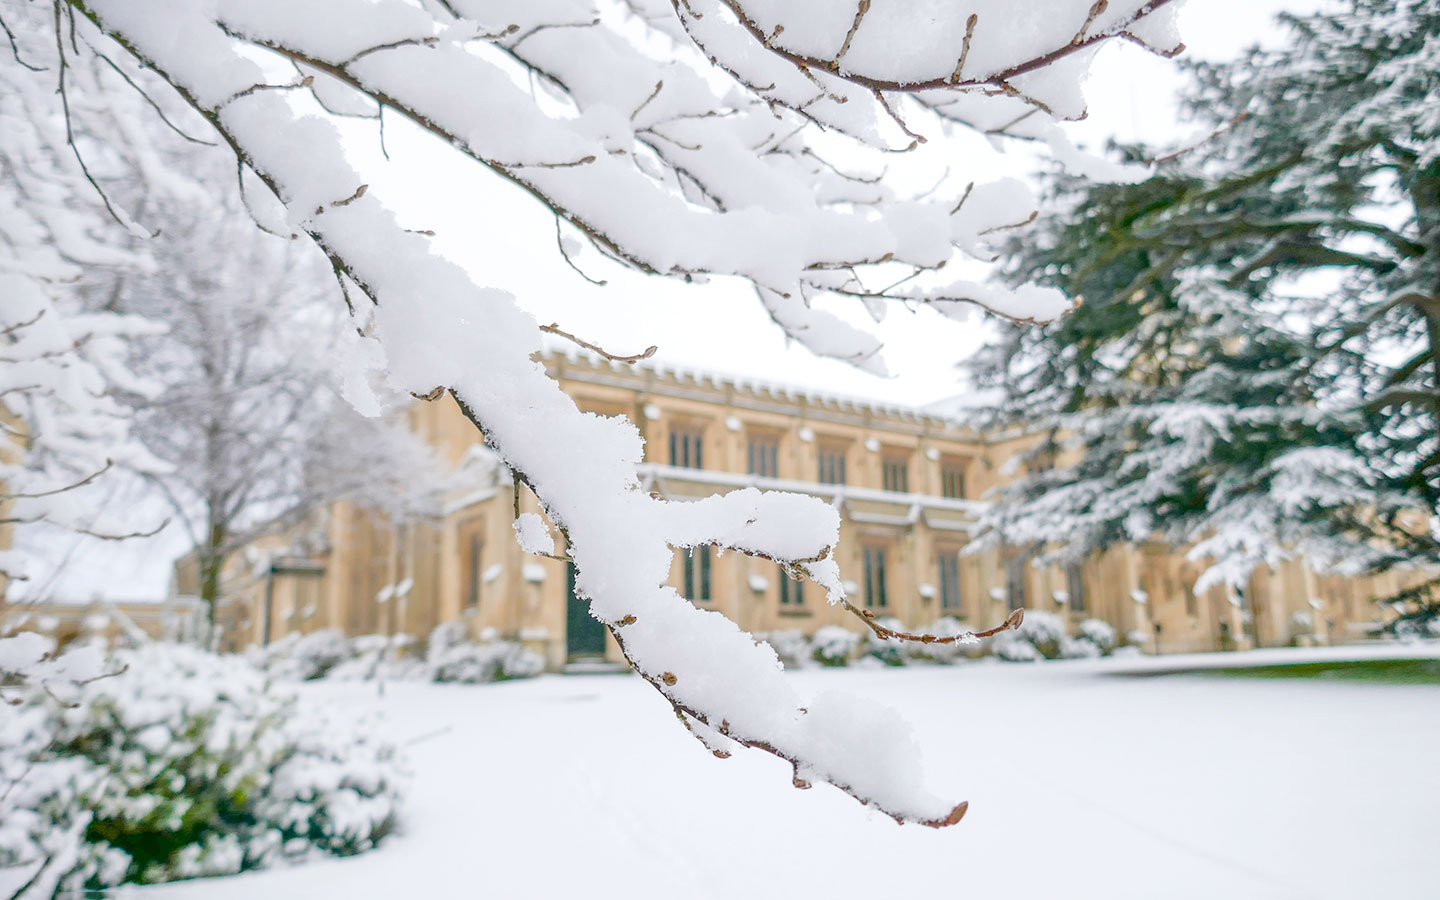 Snow in Cheltenham in the Cotswolds in January